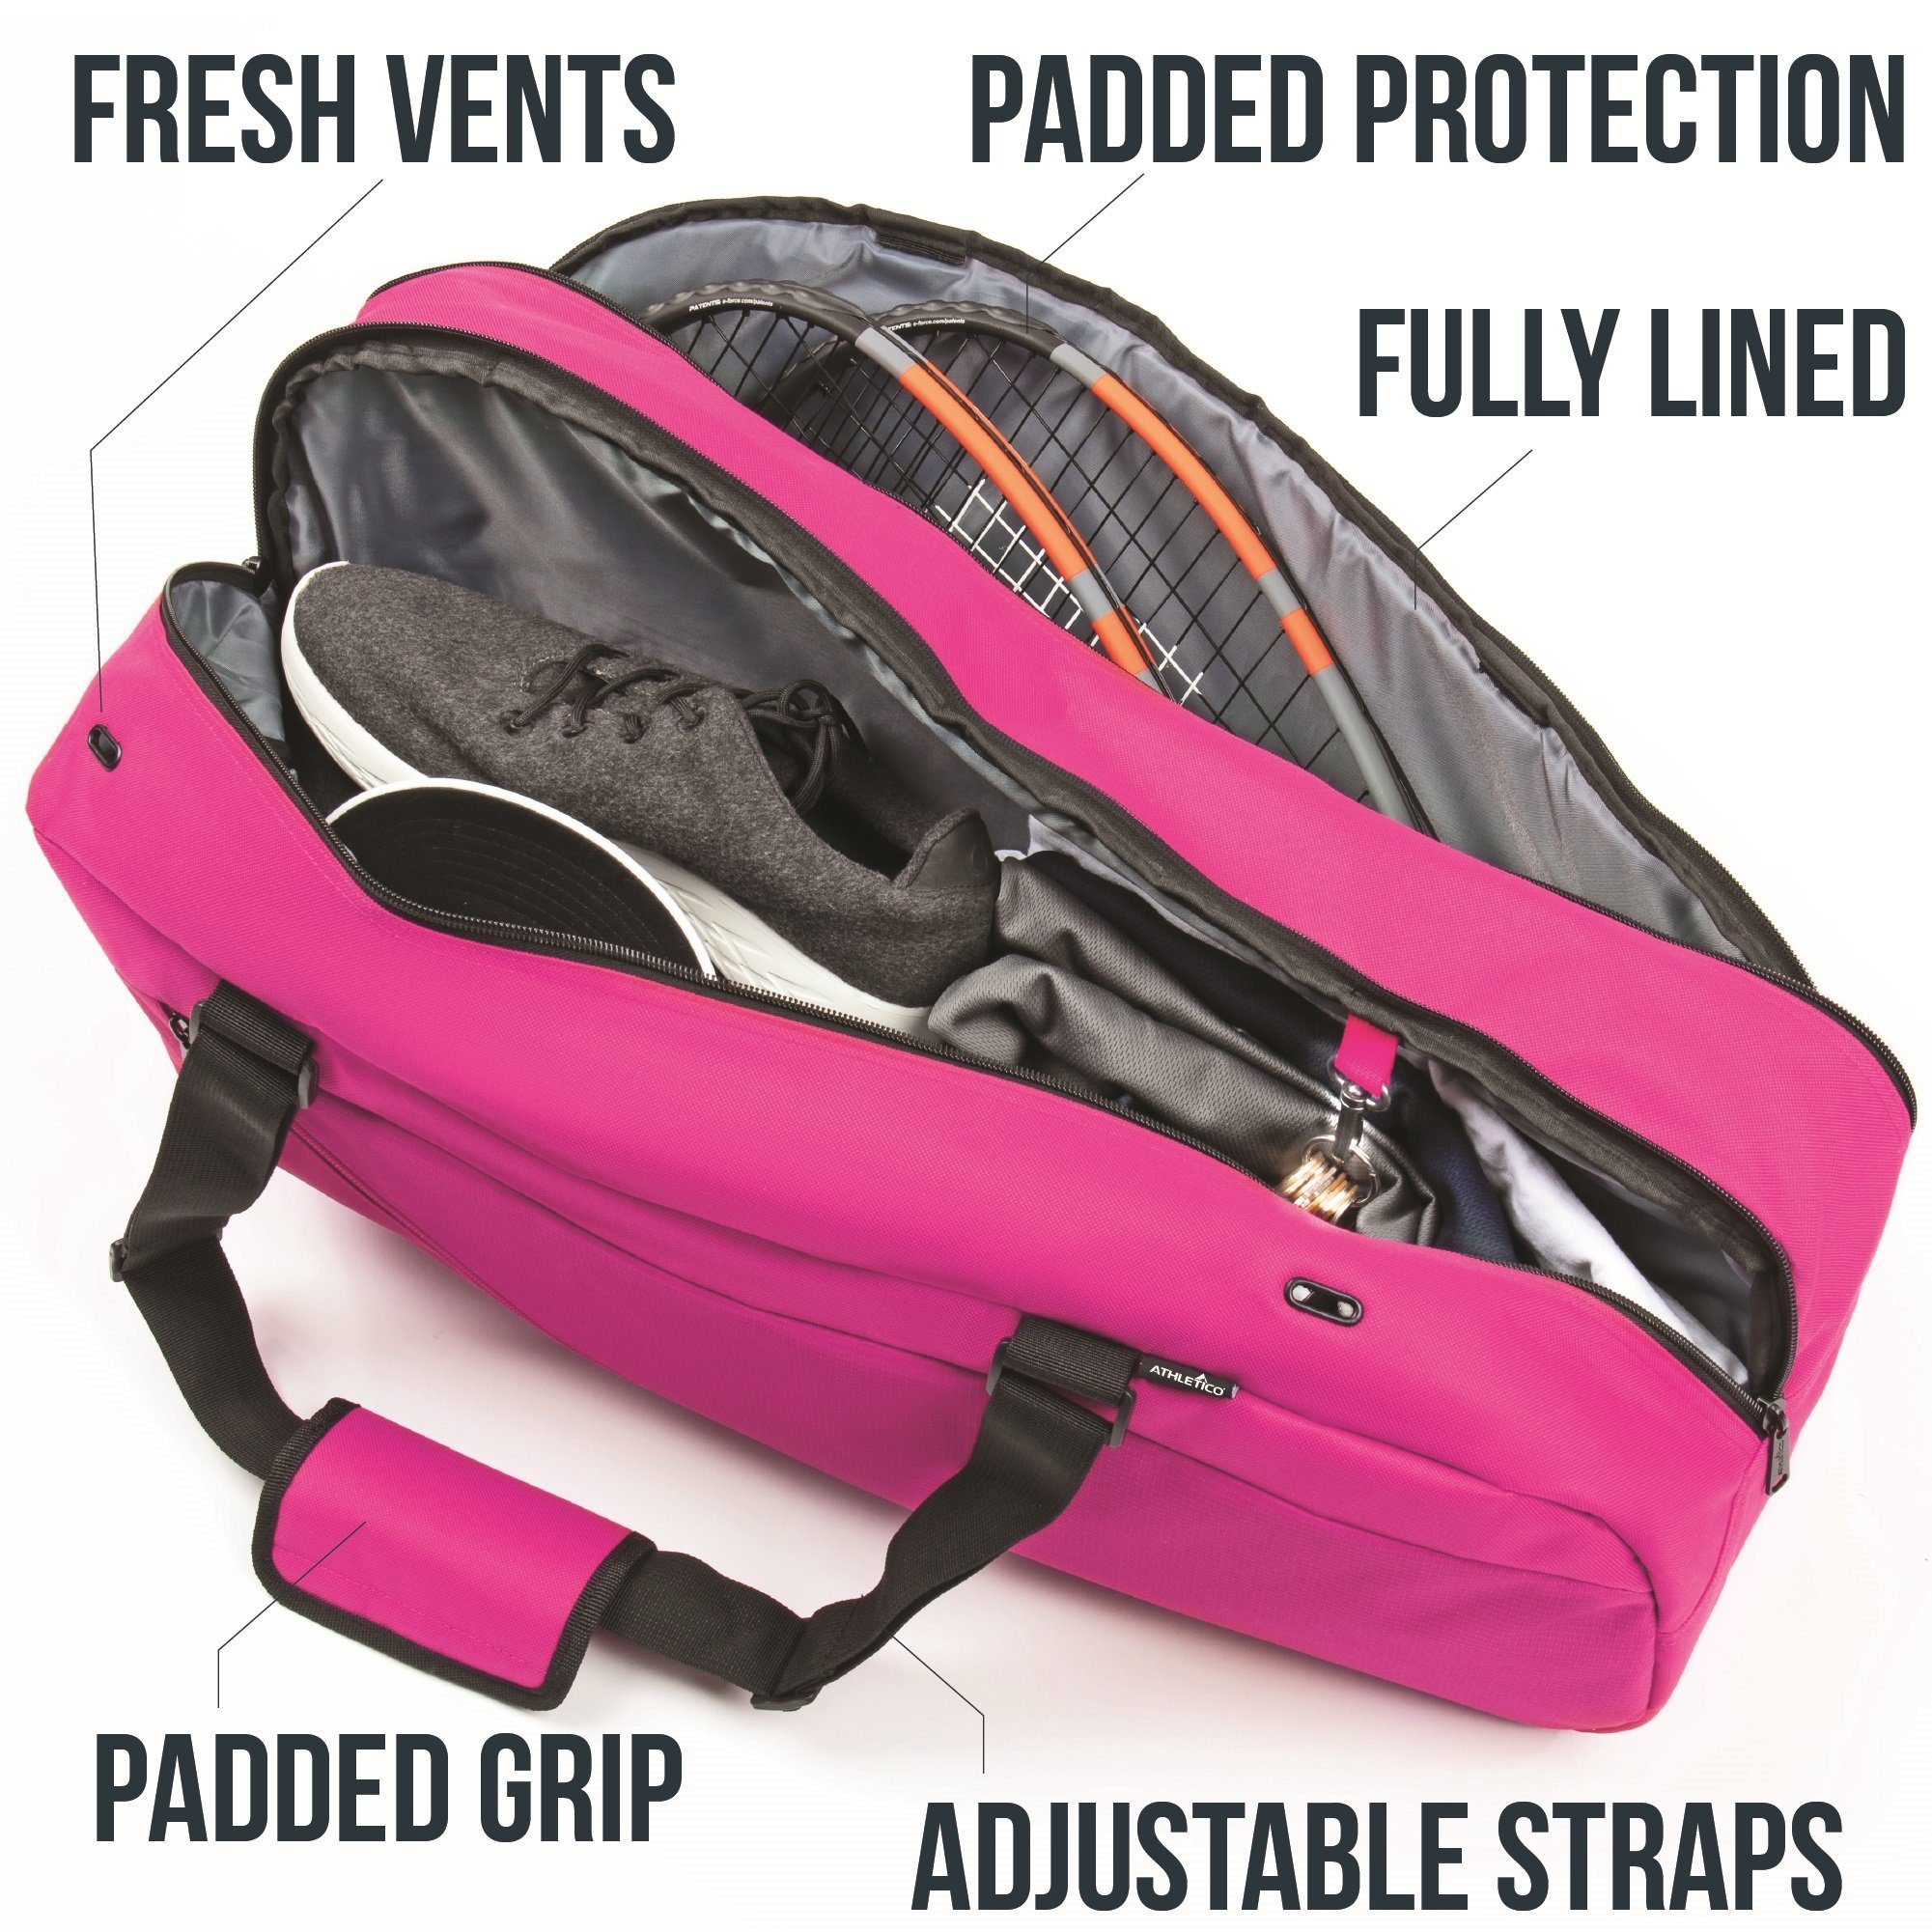 Athletico 3 Racquet Tennis Bag | Padded to Protect Rackets & Lightweight |  Professional or Beginner Tennis Players | Unisex Design for Men, Women